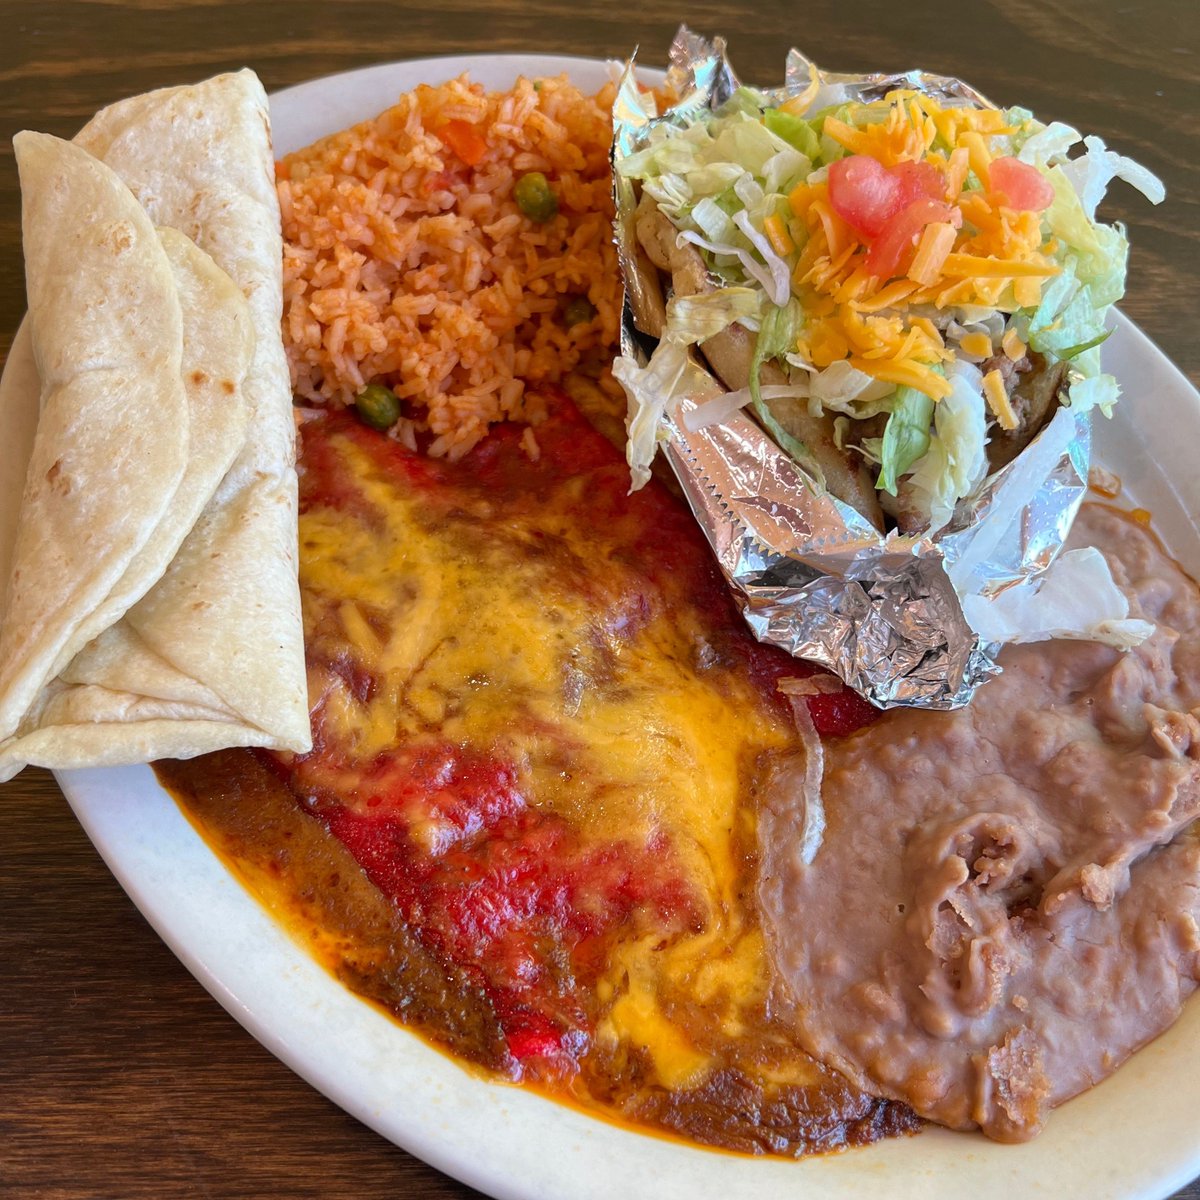 🍽️ Our Lunch Specials are lit over here at Tia’s. 🔥 Get the Laredo Plate and a 16 oz. drink for just $8.99 every Tuesday from from 10:30 a.m.- 3 p.m.

#tiastacohut #enchiladas #puffytacos #texmex #safoodie #safood #sanantoniofood #satxfood #safoodpics #eatlocalsa #sanantonioeats